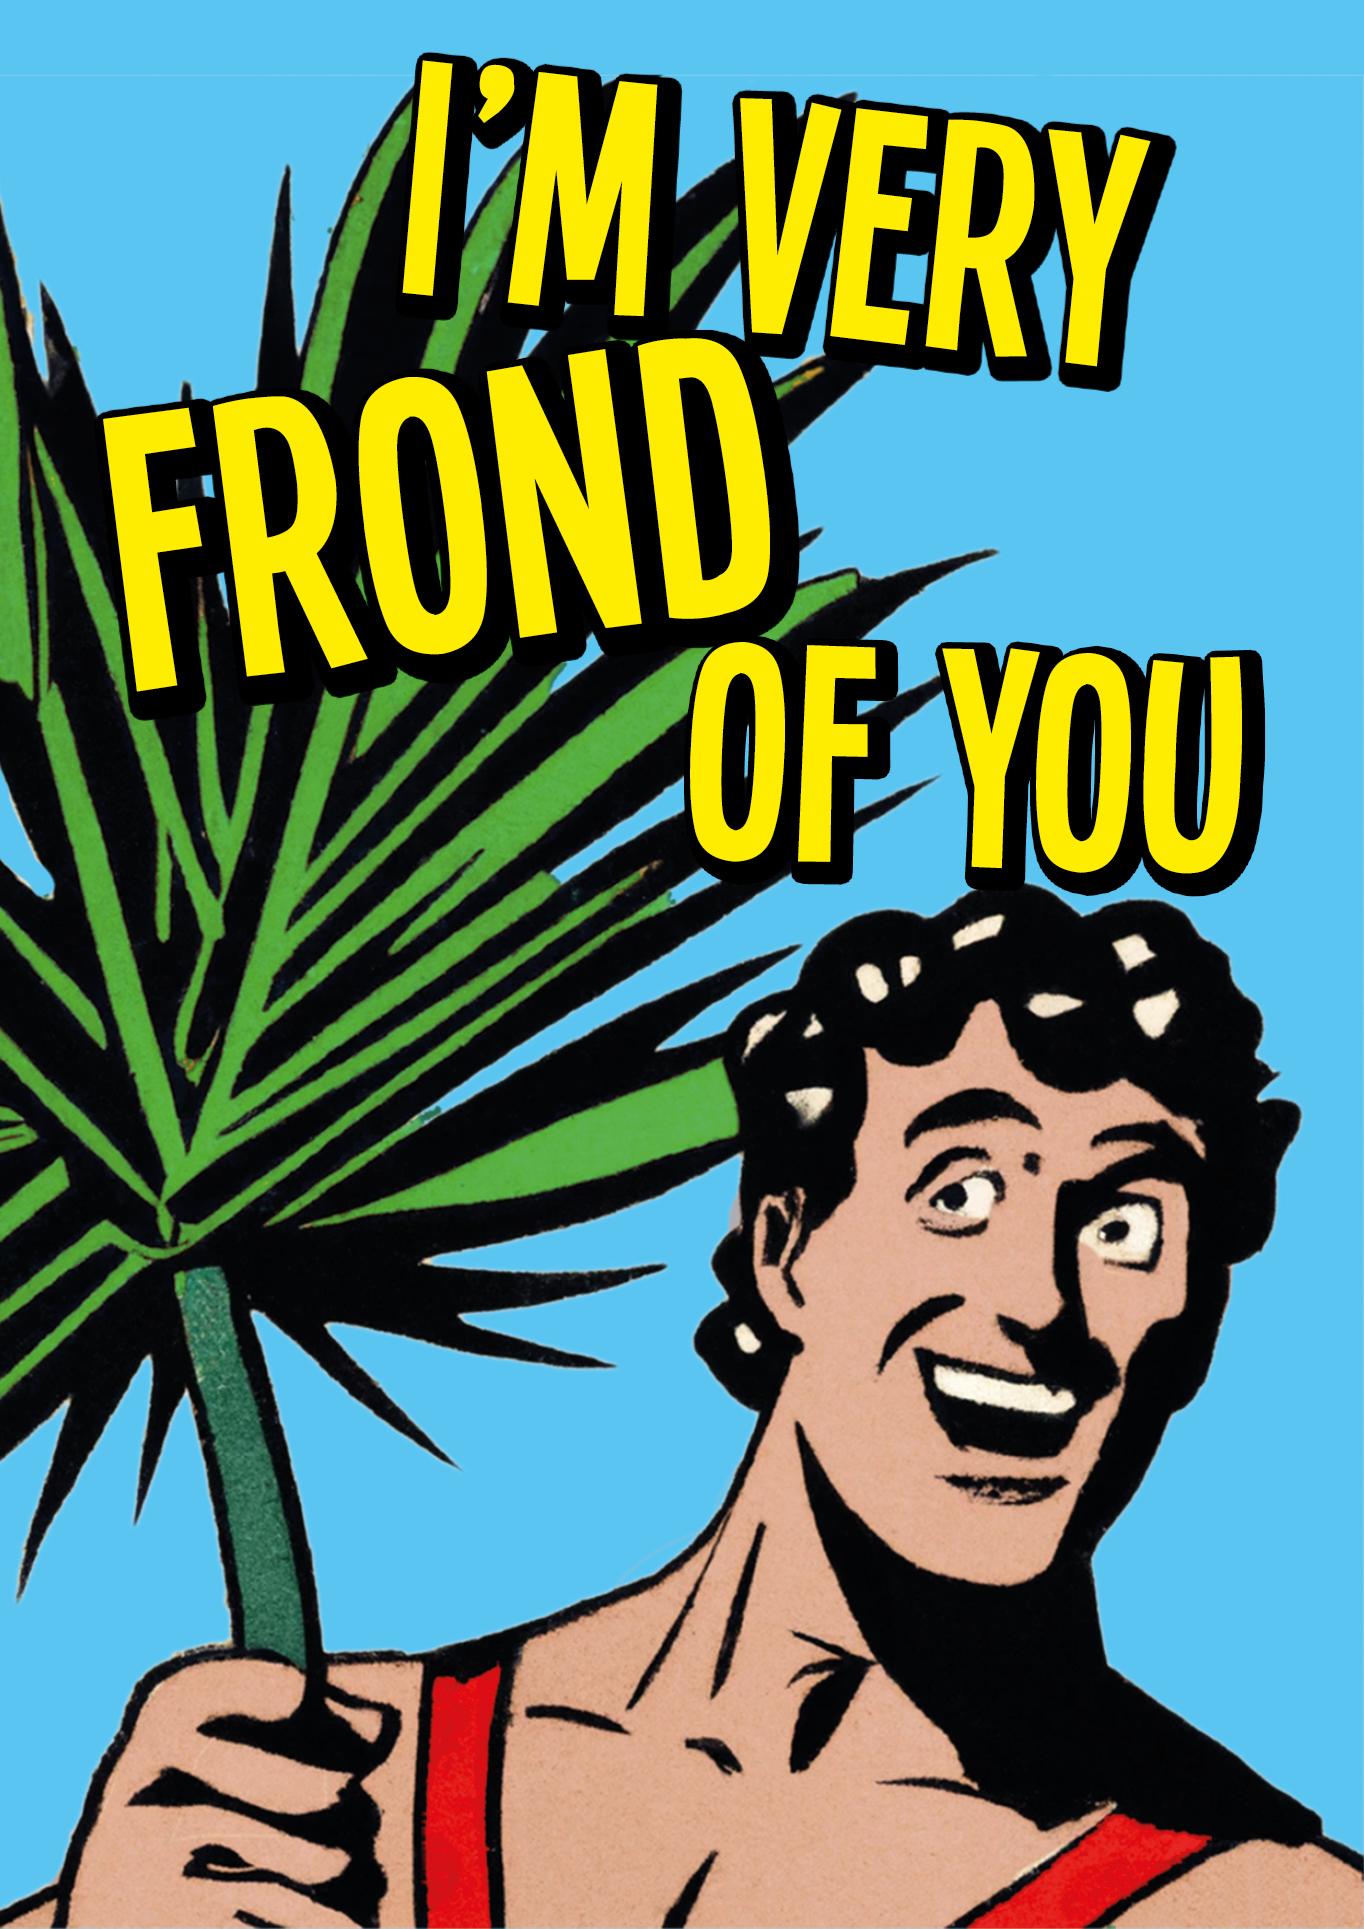 I'm very frond of you